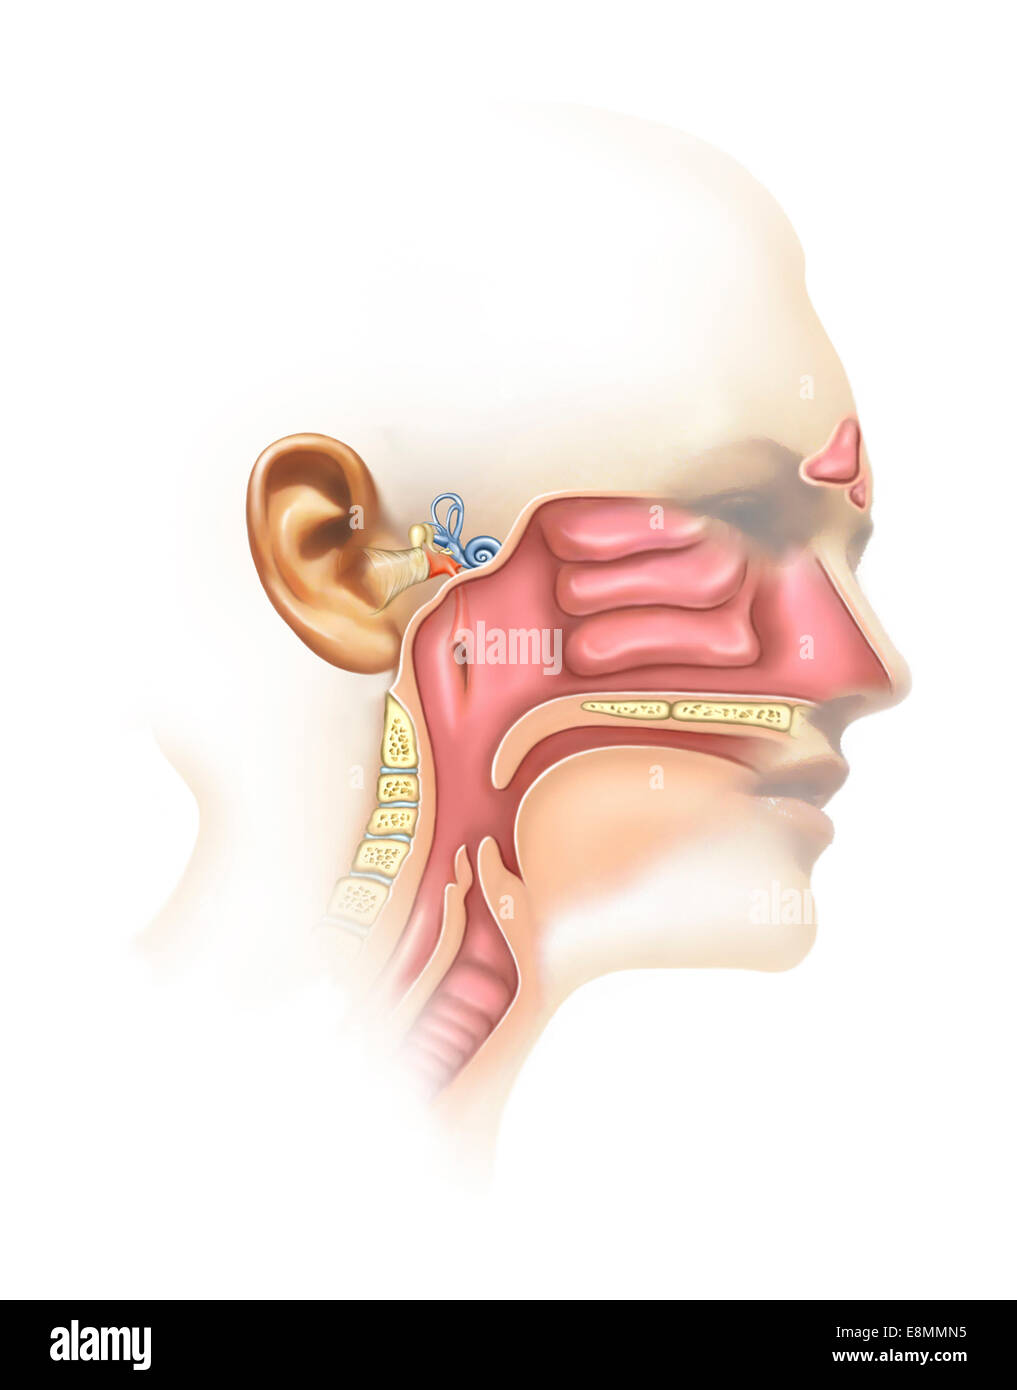 Anatomy of inner ear and sinuses. Stock Photo